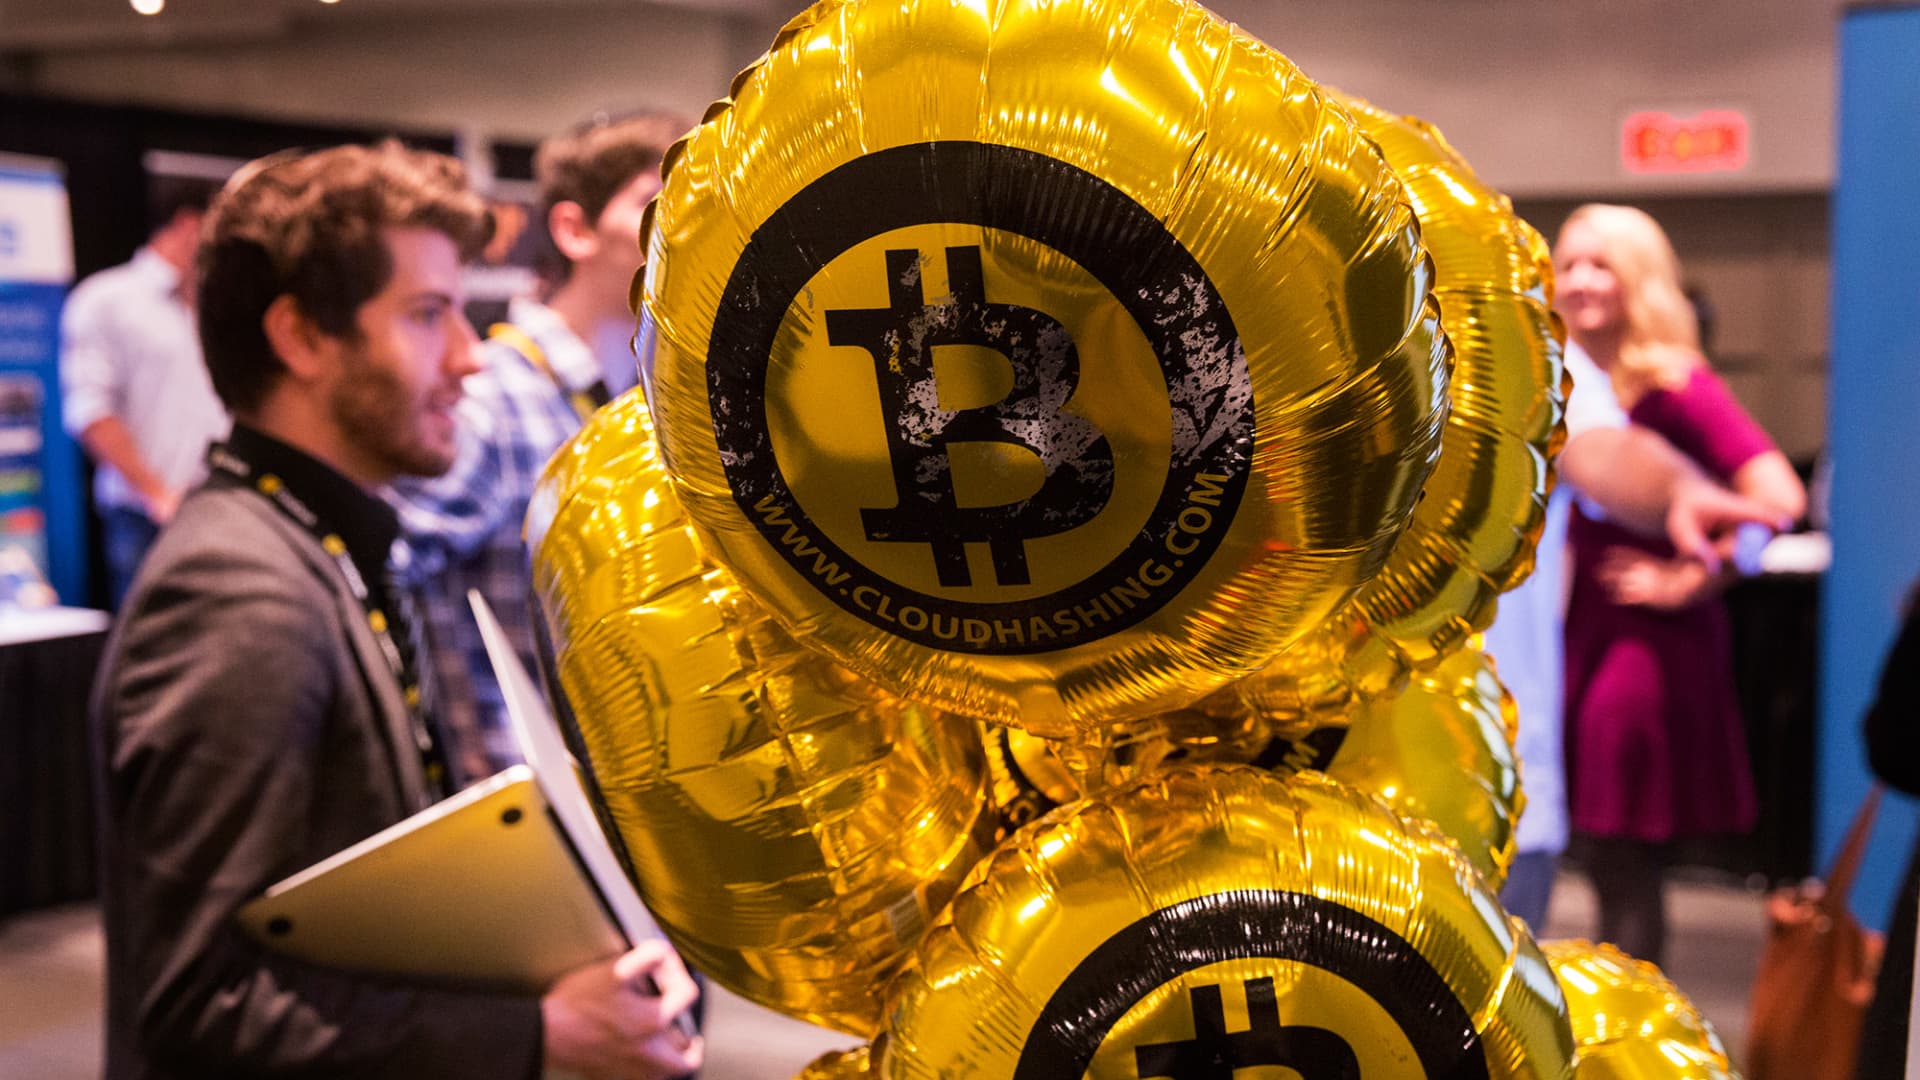 If you put $1,000 in bitcoin in 2013, here's how much you'd have now